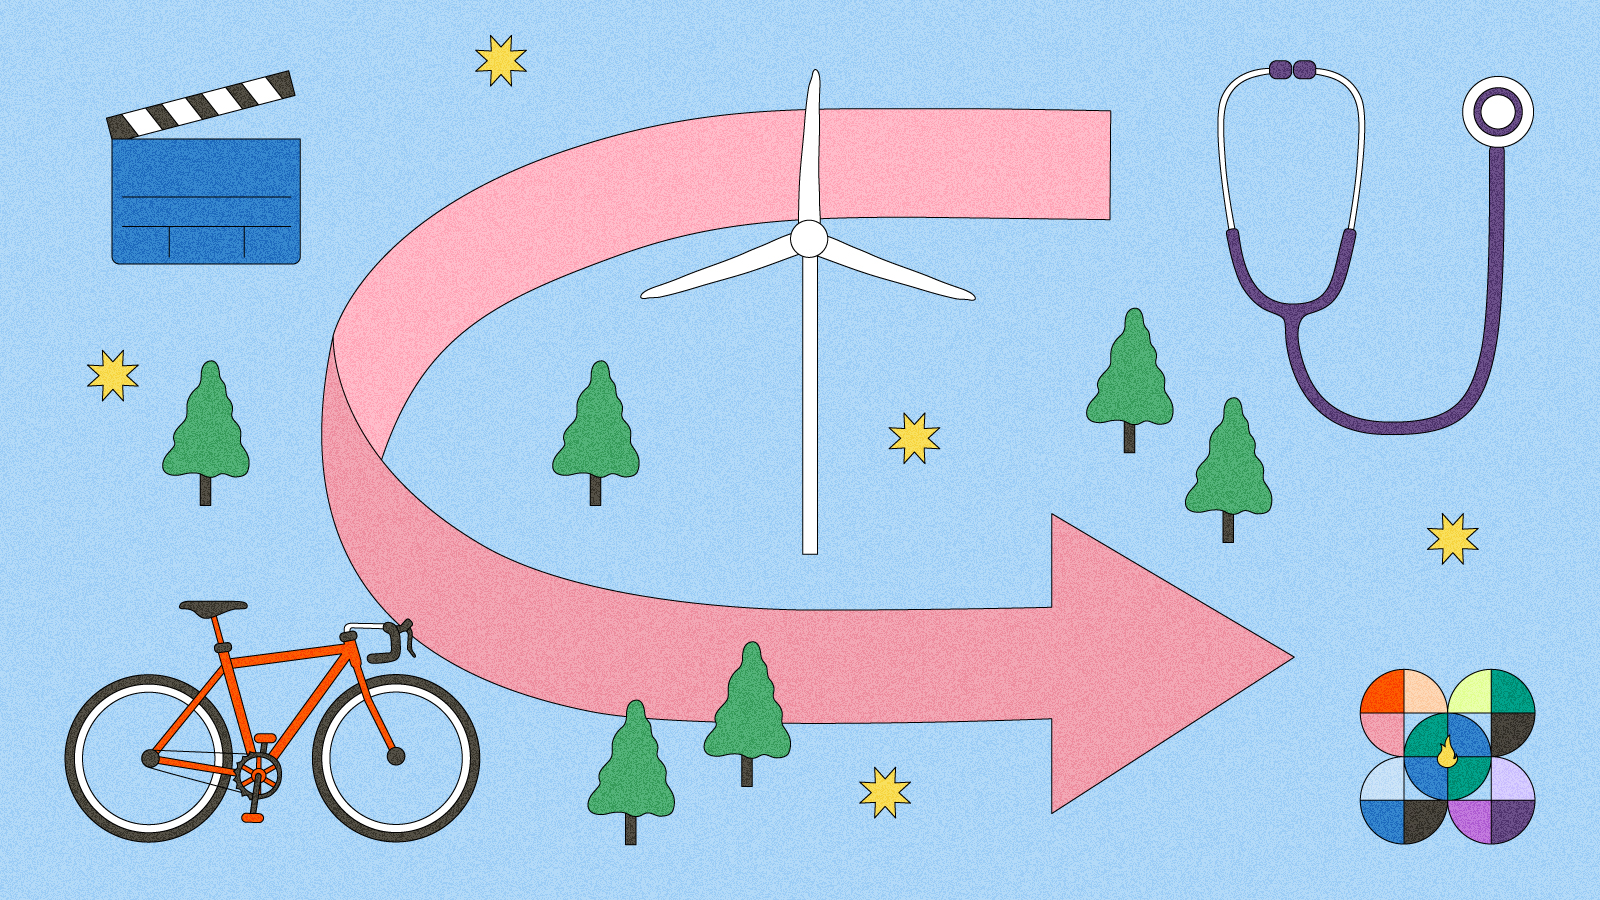 Illustration of arrow surrounded by trees, starbursts, a director's clapboard, a windmill, a stethoscope, a bike, and the Temperature Check logo